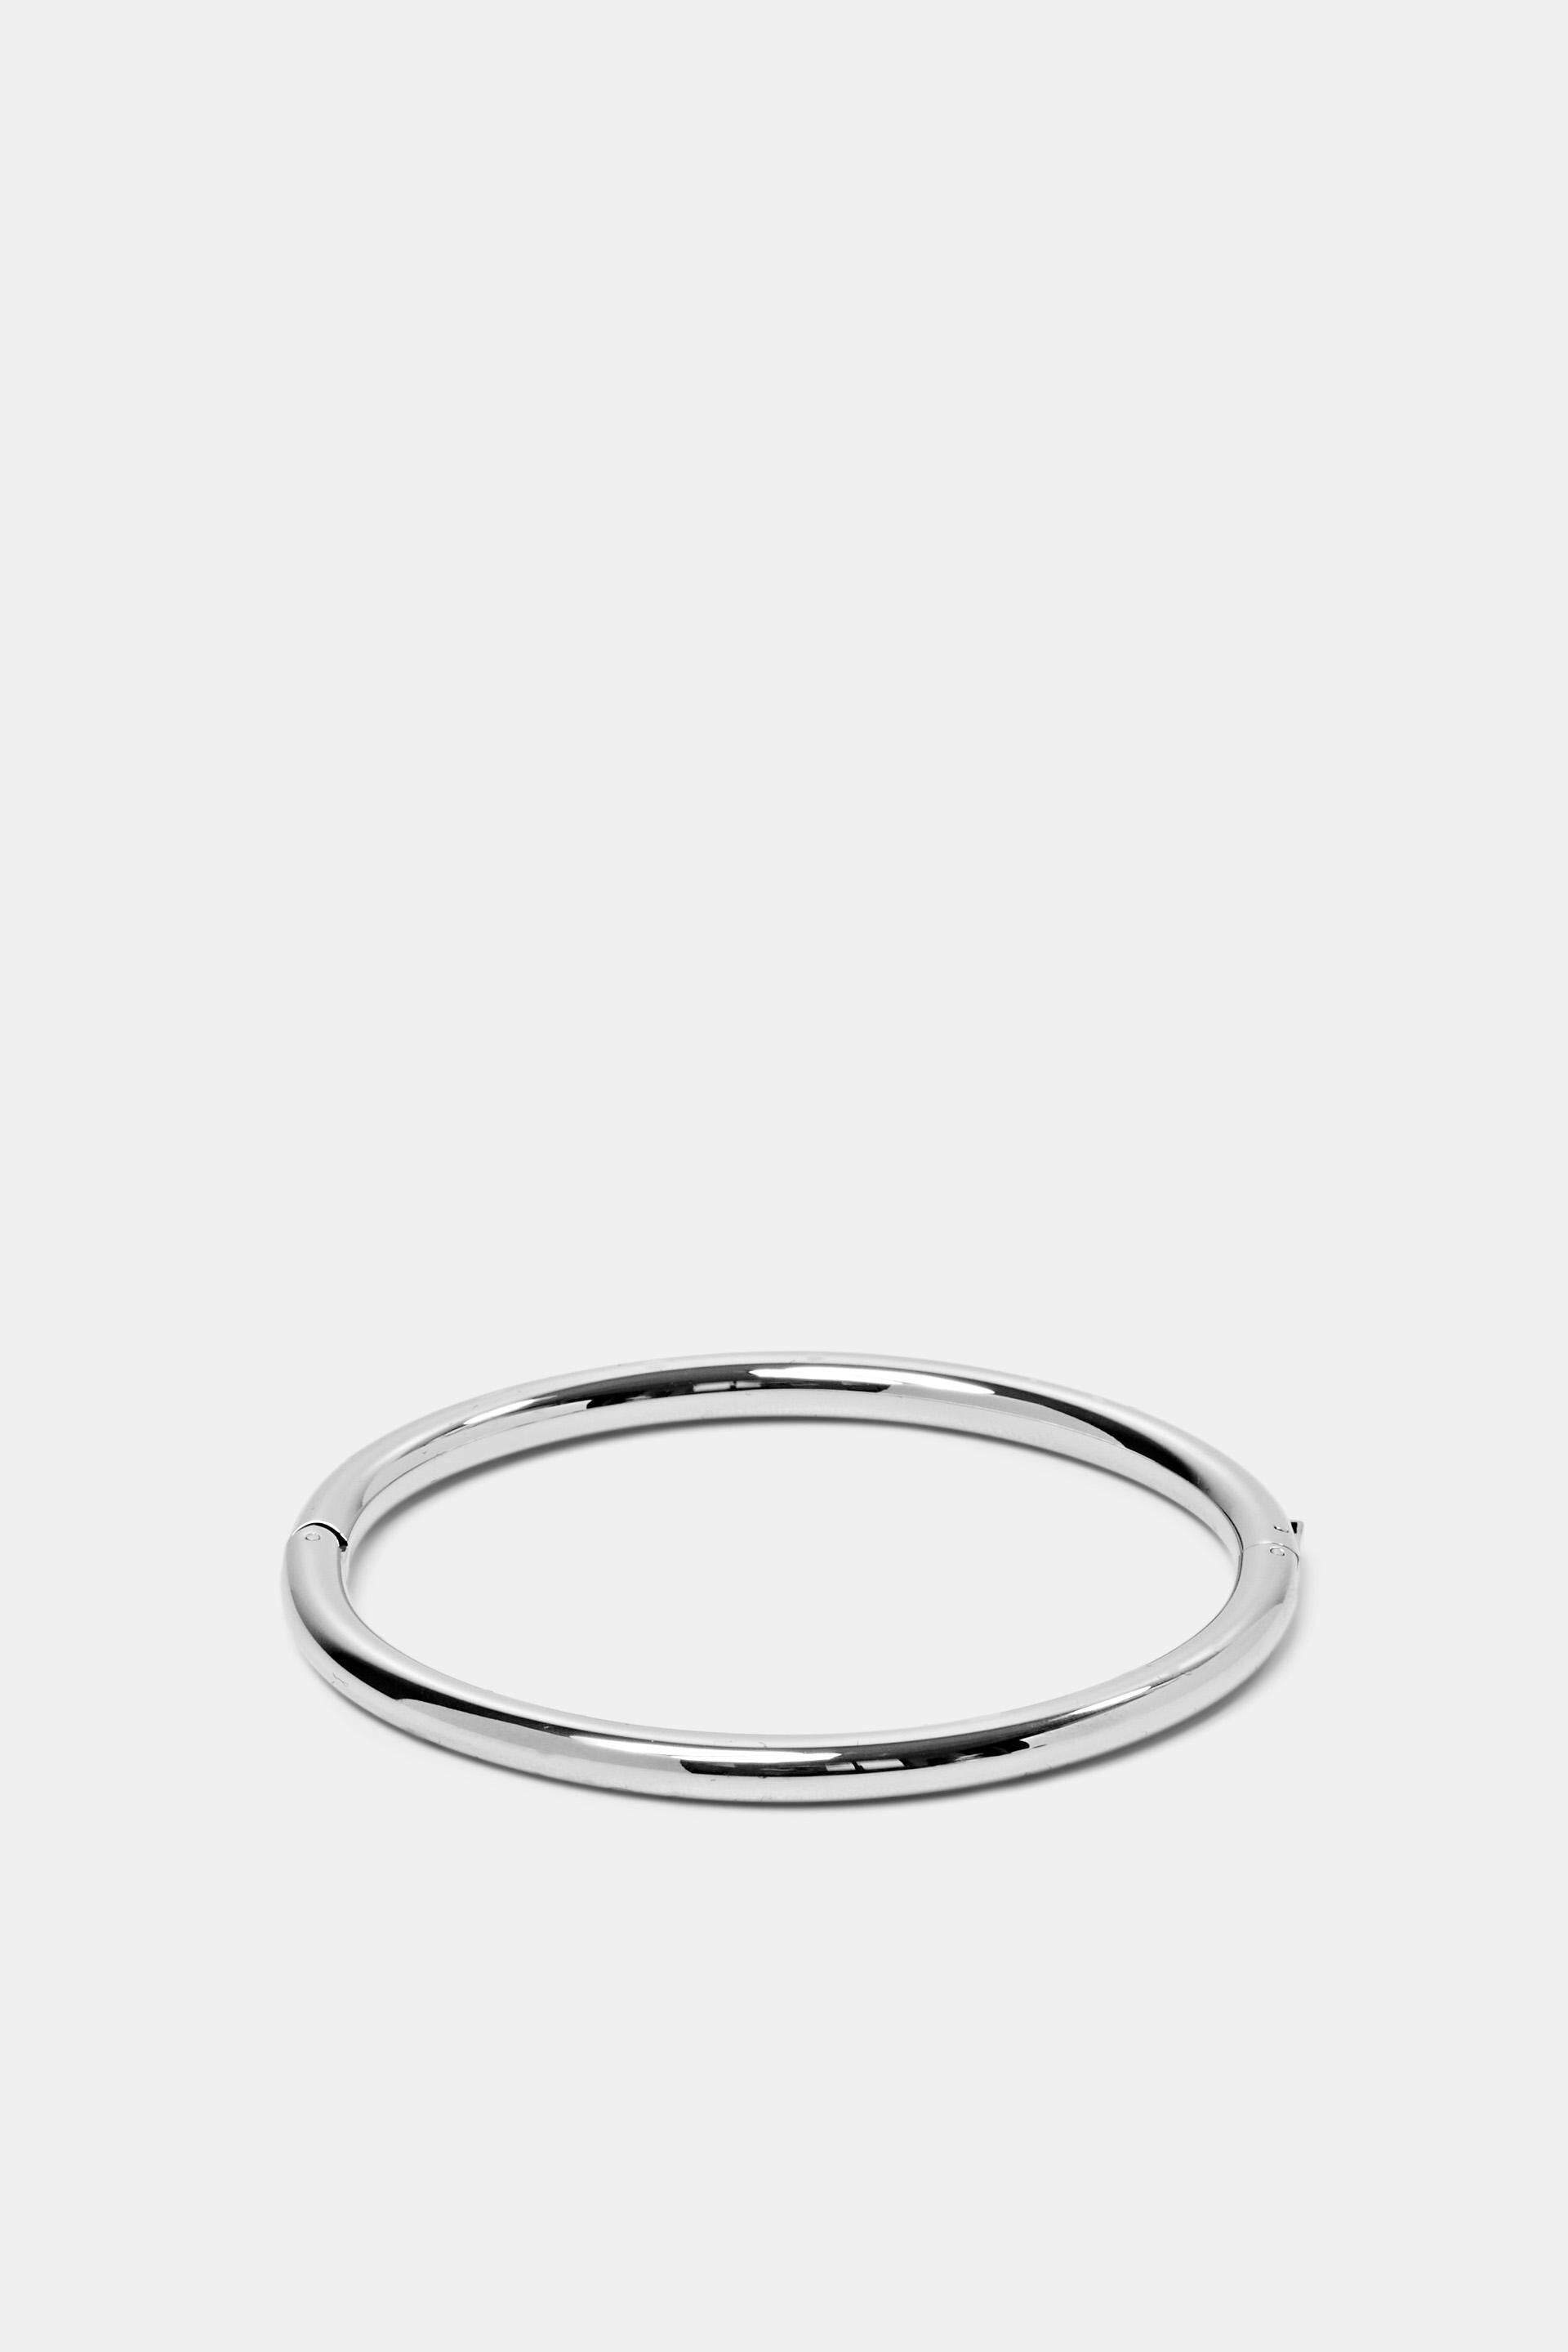 Esprit Bangle made steel stainless of